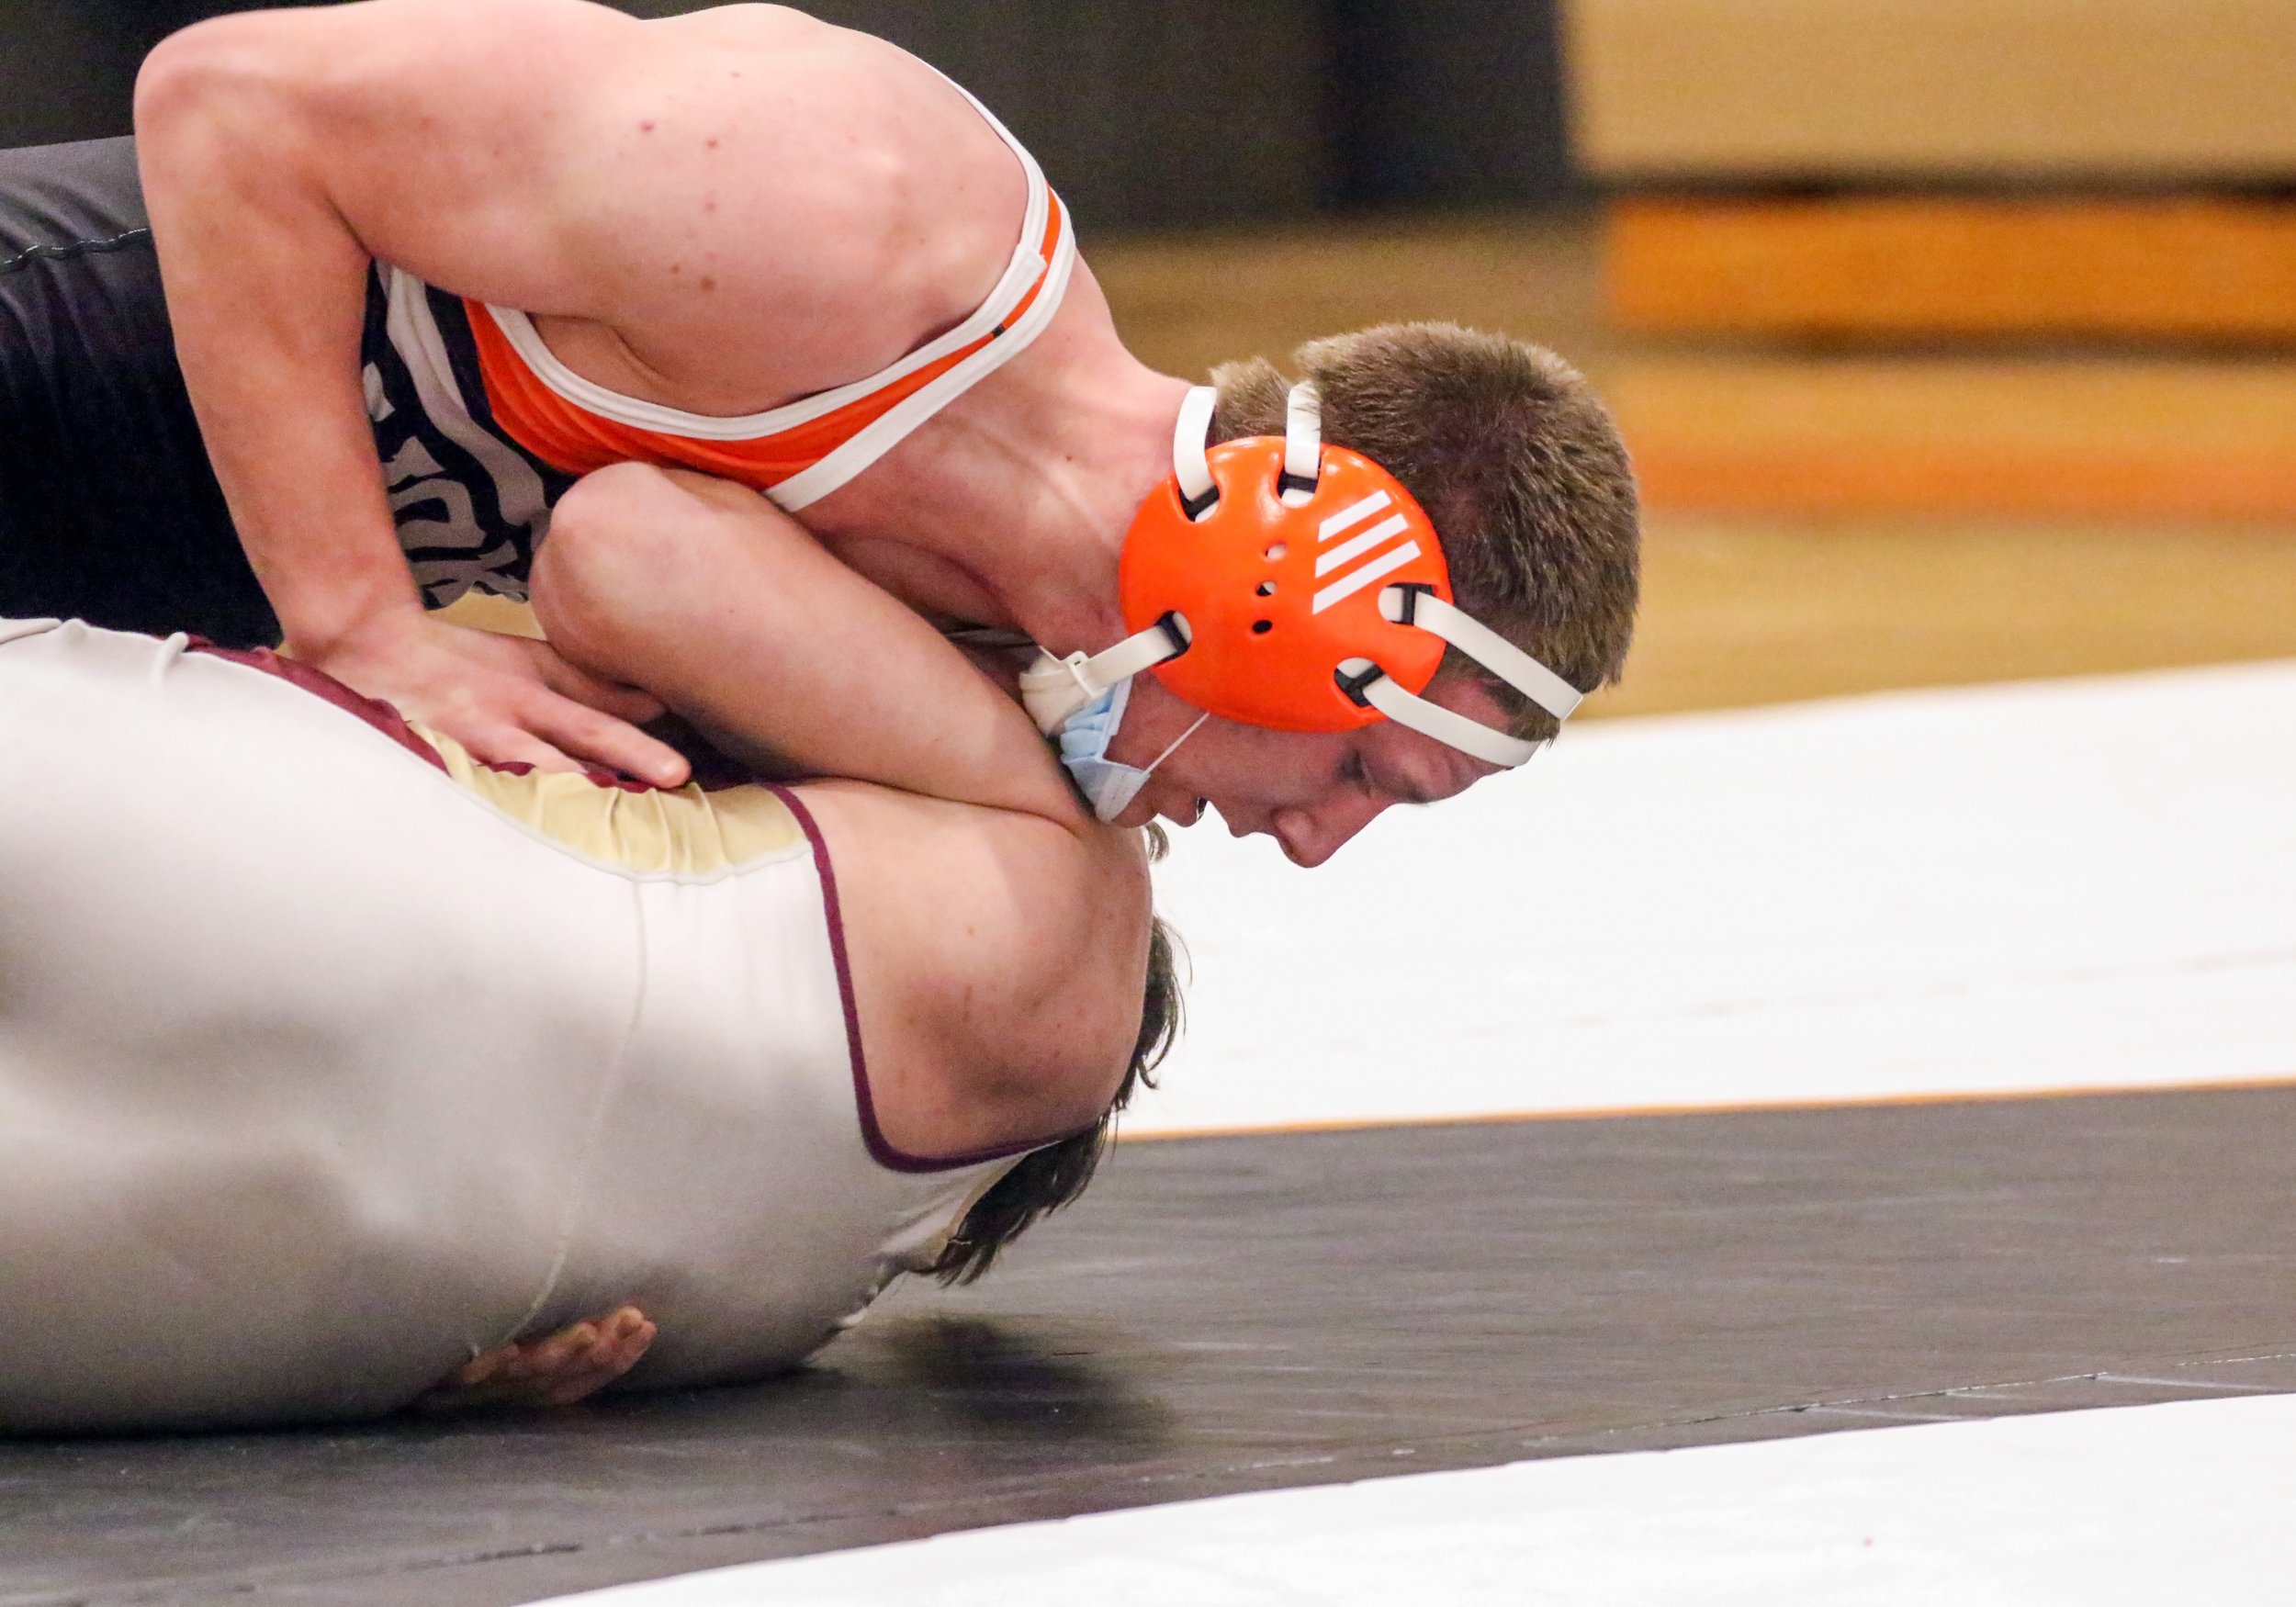  Wellsville’s Xander Outman, top, looks to roll over his opponent for the pin during his bout at 152 pounds in Tuesday night’s home match against Avoca/Prattsburgh/Hammondsport. [Chris Brooks/WellsvilleSports.com] 